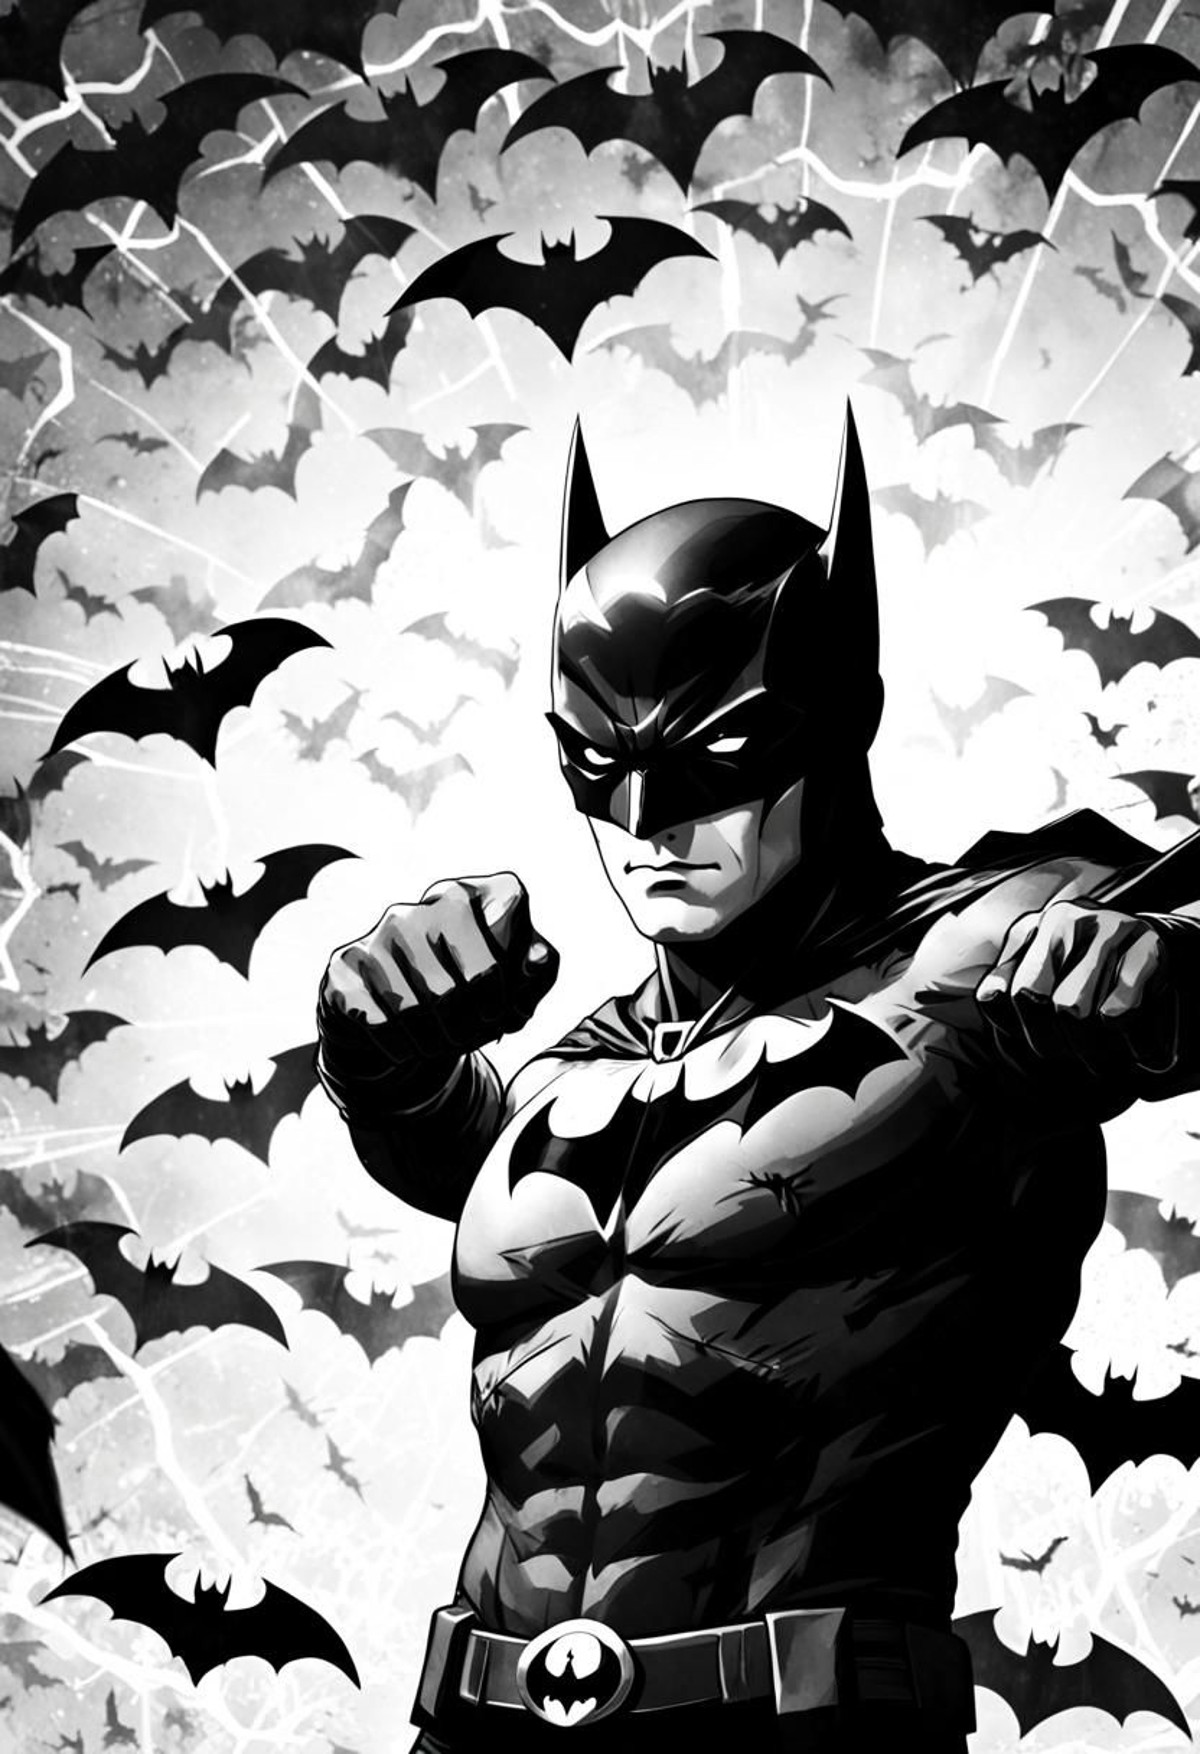 Super Closeup Portrait, monochrome, angry 1960s batmans Silhouette Seen through a Wall of bats in daylight, Bruce Lees ico...